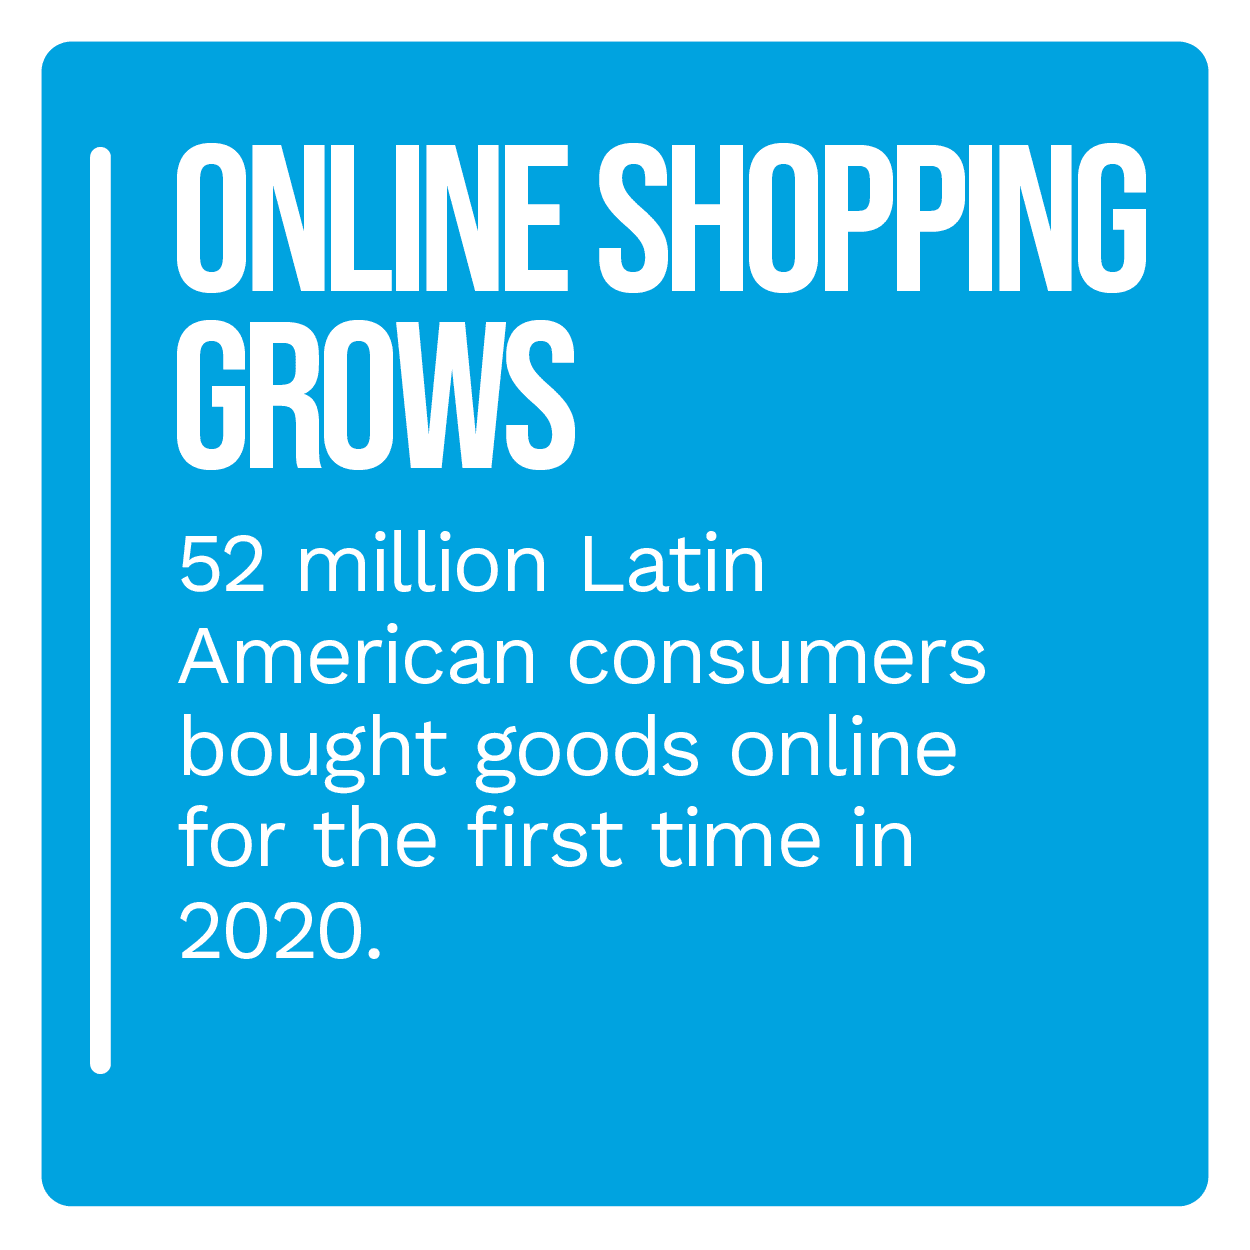 Online shopping grows in Latin America